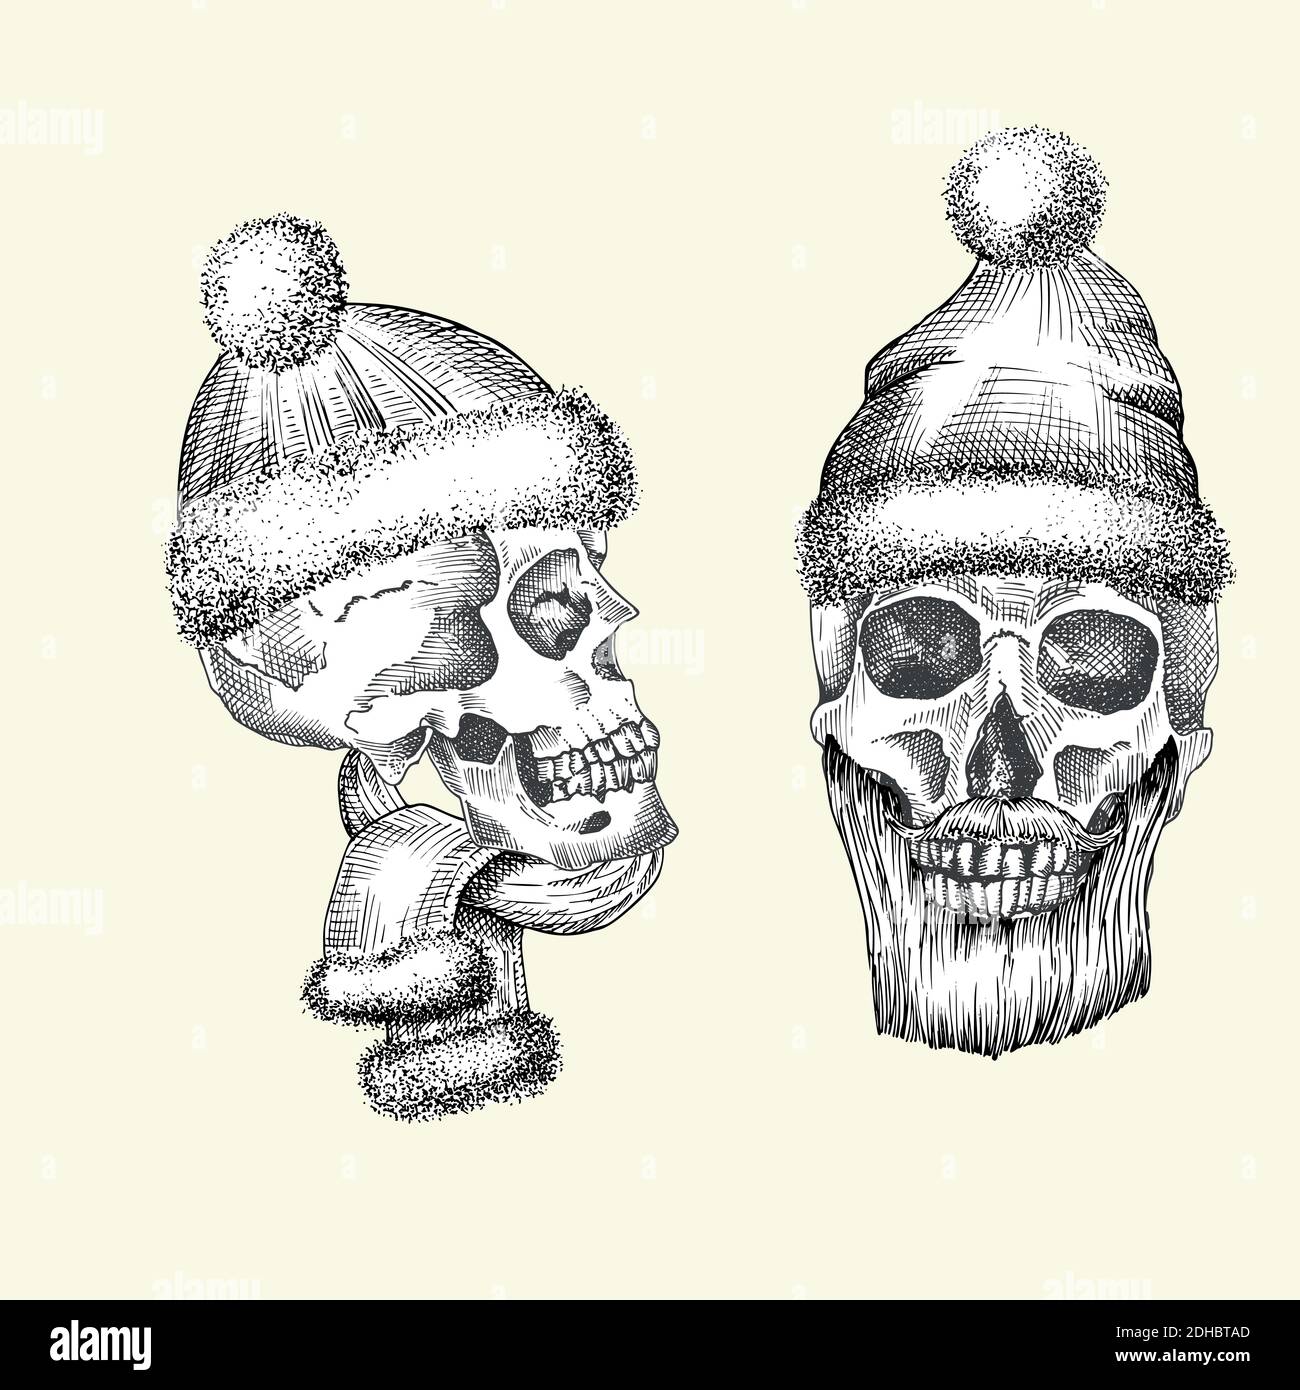 Set Hand drawn sketch human skull with santa hat and fur scarf. Black graphic art isolated on white background. Full face view of head. Engraving art Stock Vector